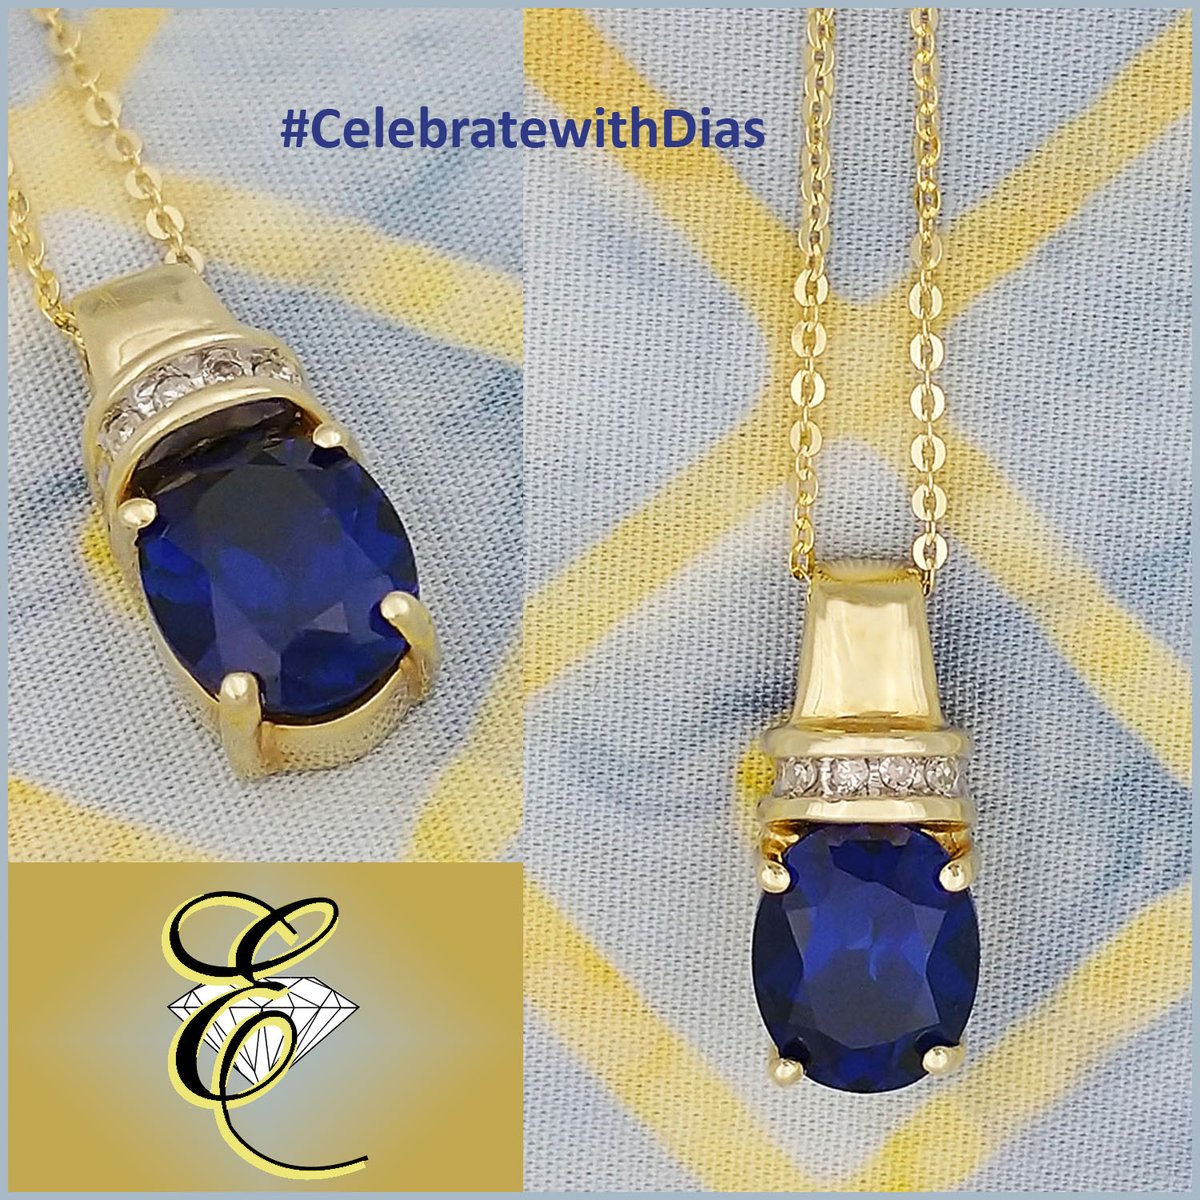 10K yellow gold Pendant with an oval 8mm x 10mm lab-created Blue Sapphire and 4 single-cut Diamonds. From Our Estate Collection $300. Chain sold separately.

#start2sparkle #alwaysthinkDIAMONDS #eichhornglow #1diamondatatime #CelebratewithDias #ColorWithYourDias #estatejewelry